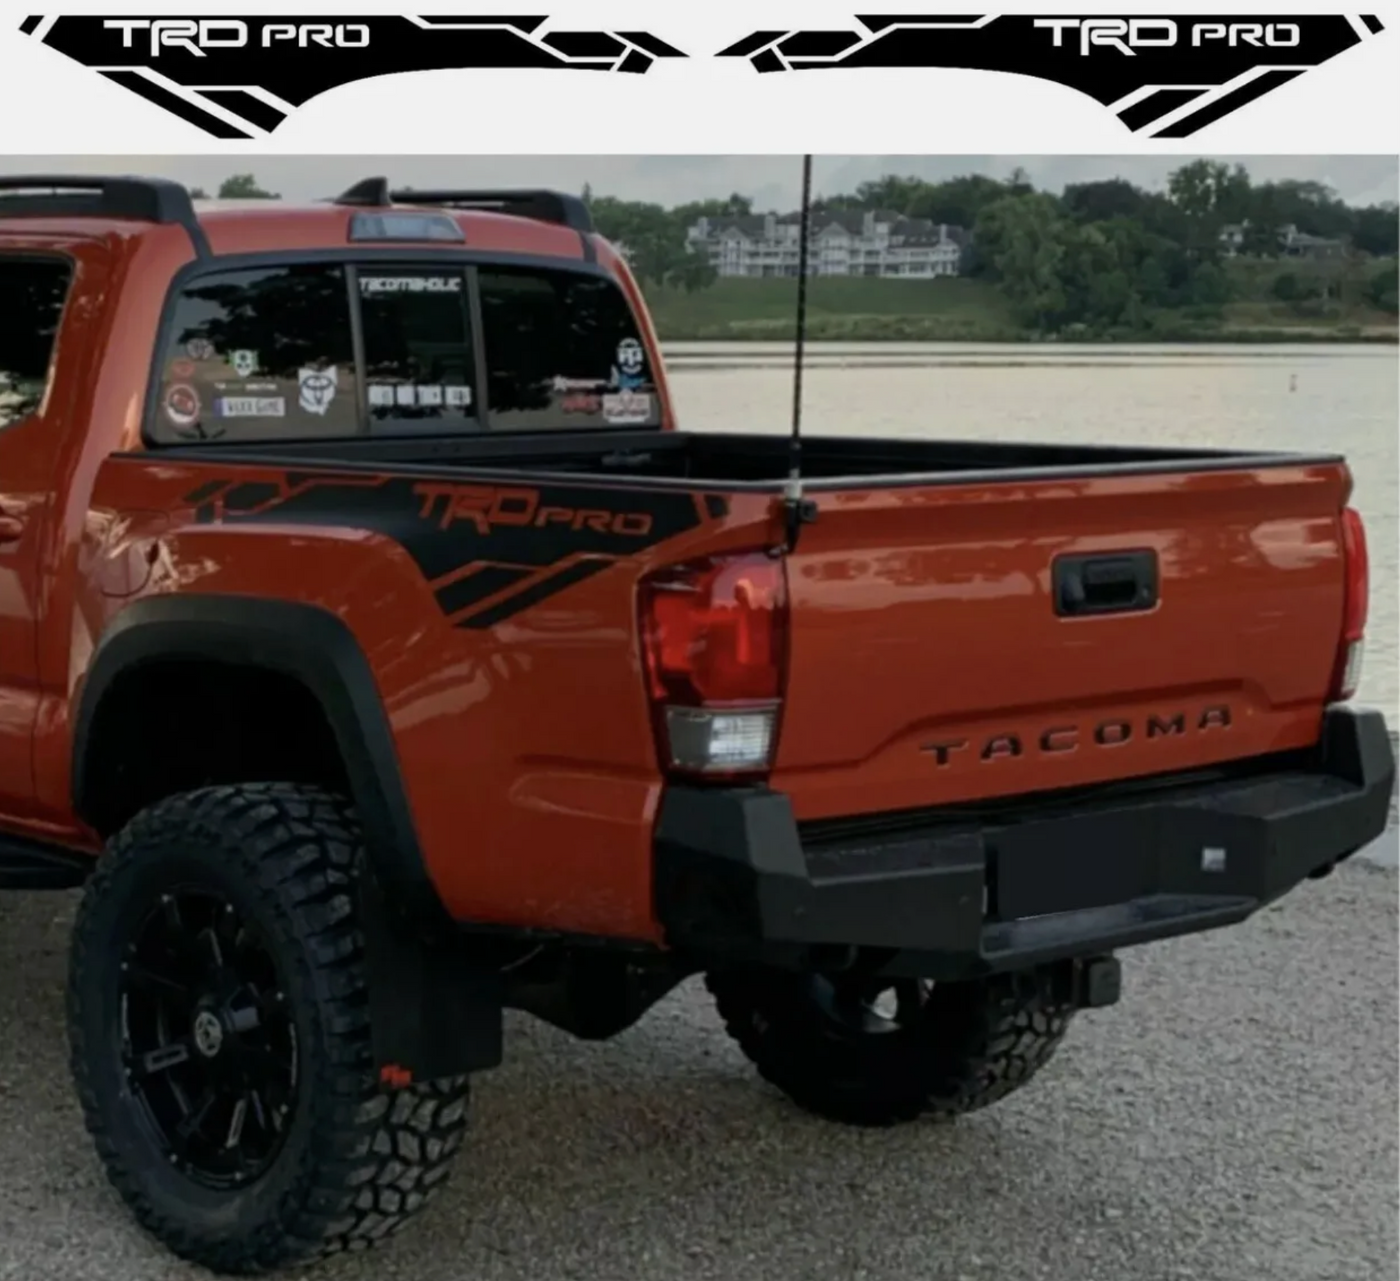 Toyota Tacoma TRD PRO 2016-2021 side bed Vinyl Decals graphics rally stickers